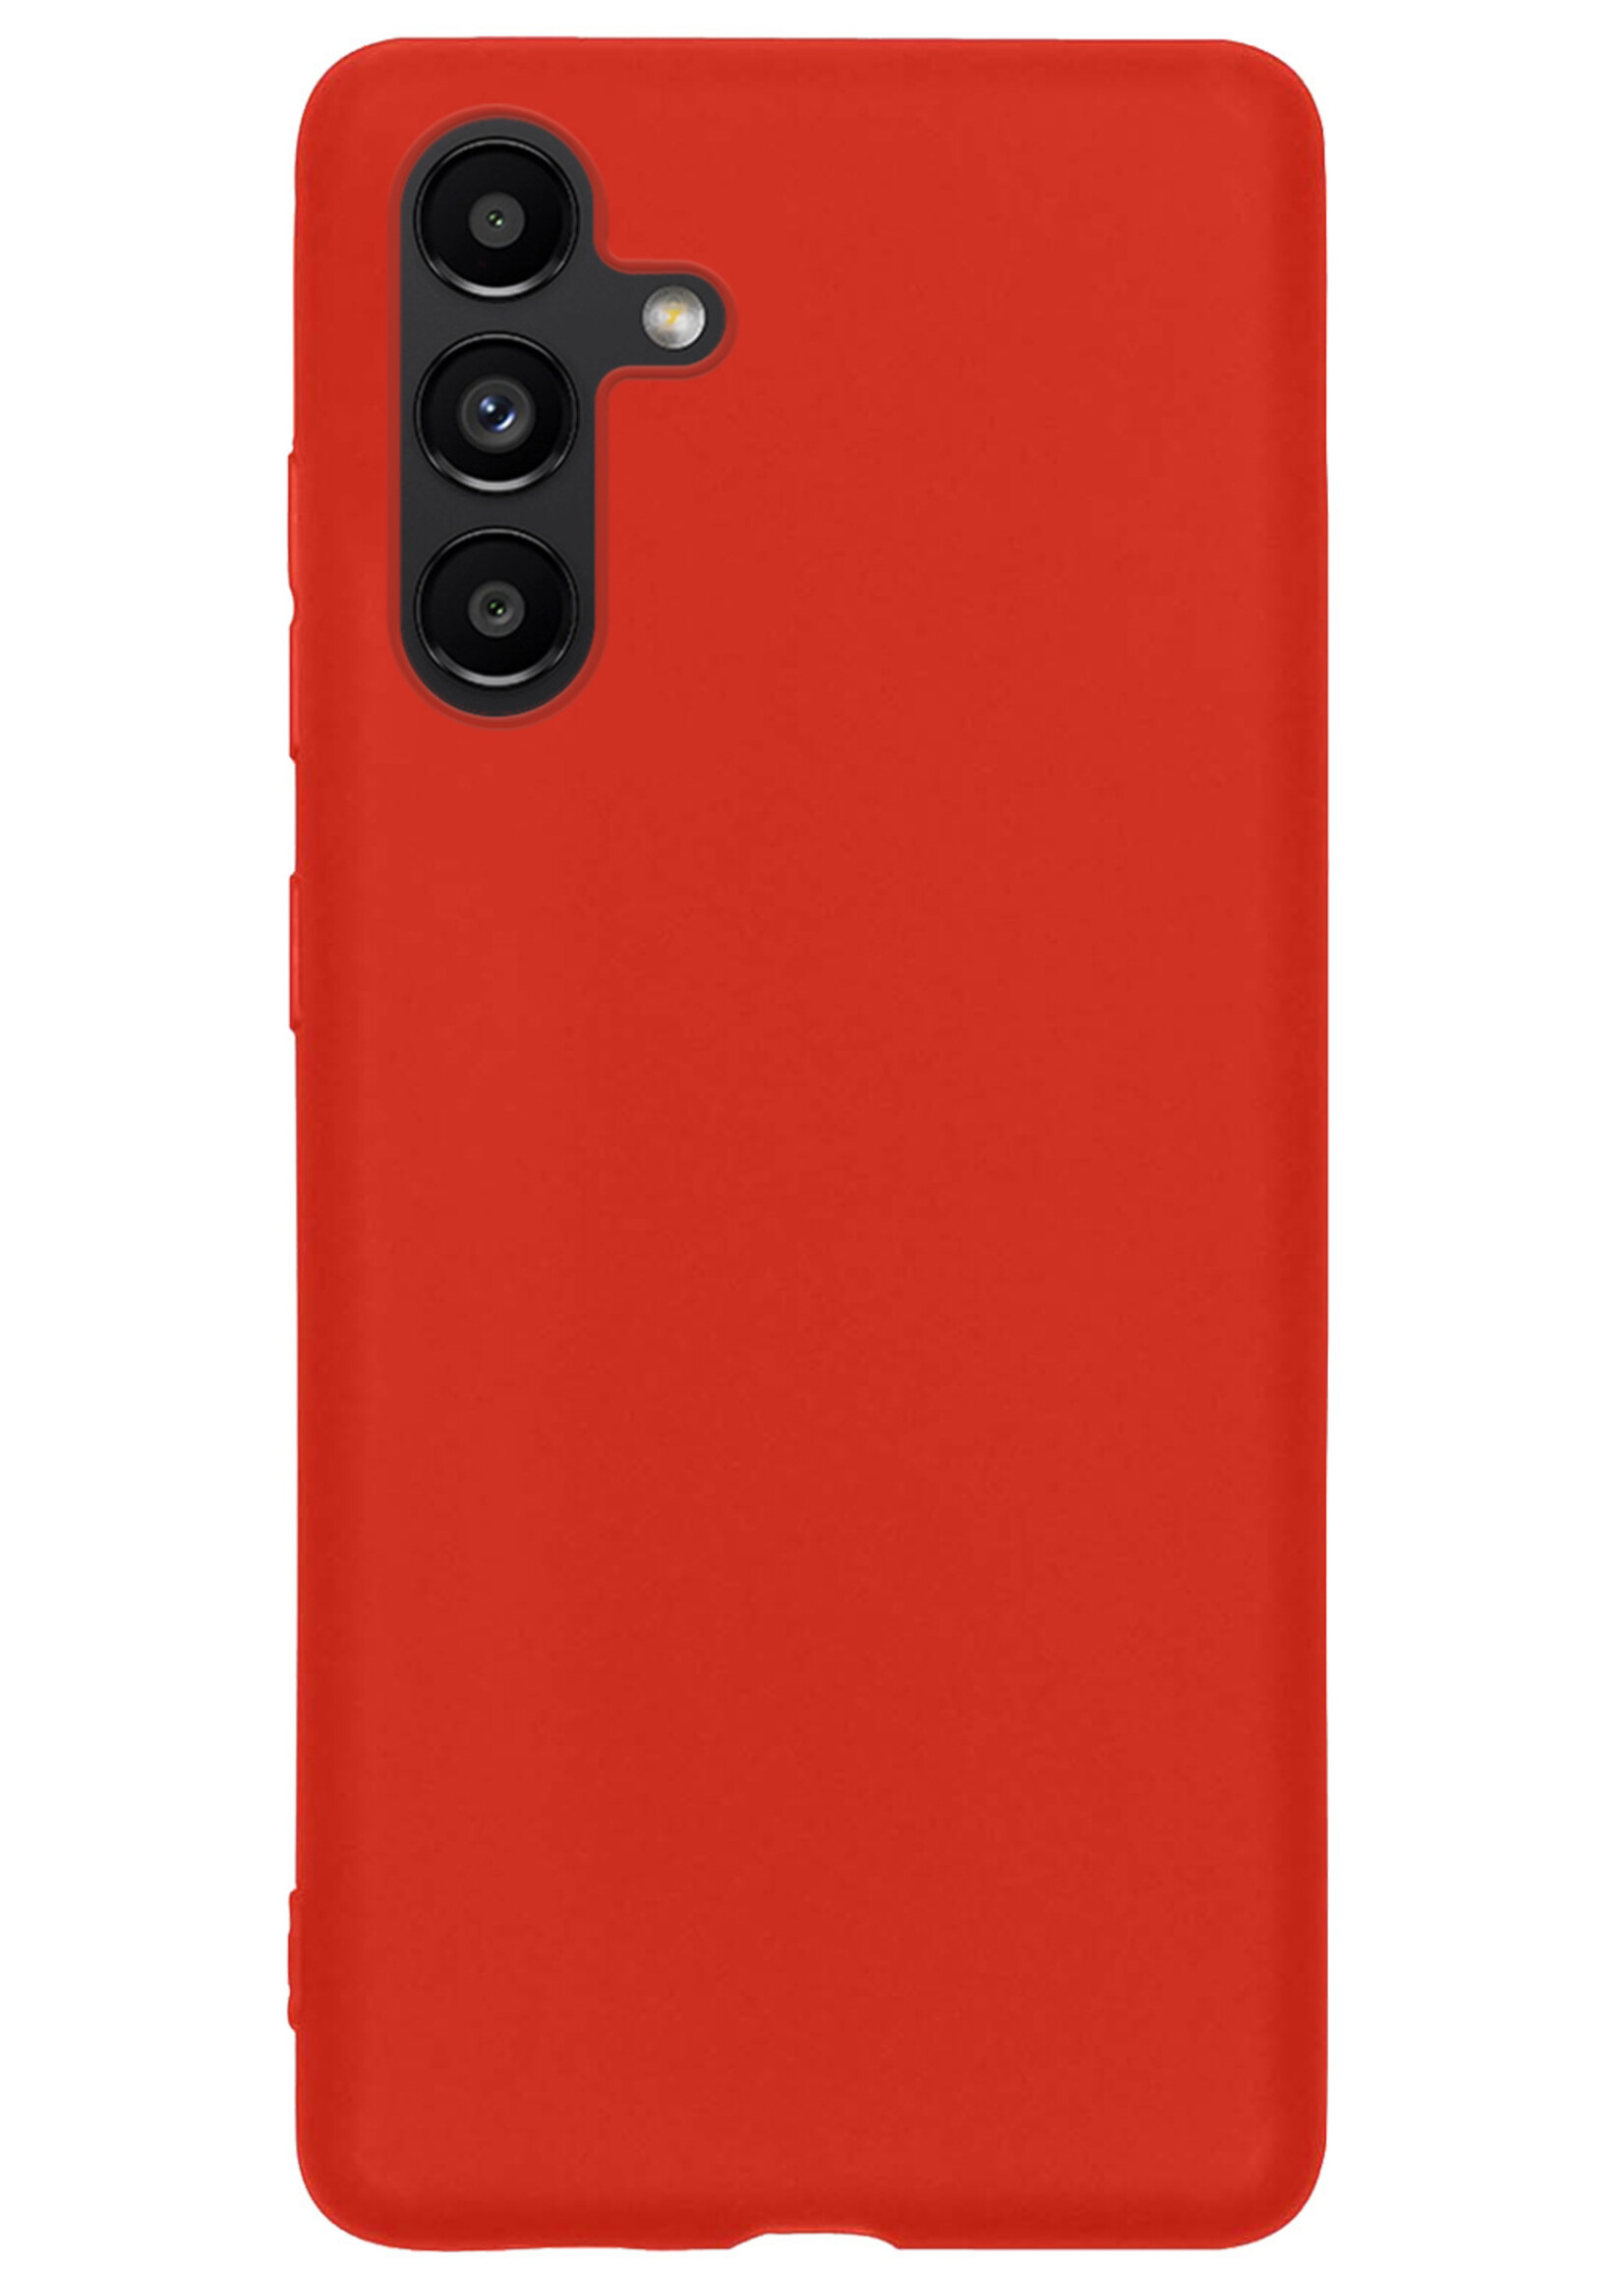 BTH Hoesje Geschikt voor Samsung A13 5G Hoesje Siliconen Case Hoes - Hoes Geschikt voor Samsung Galaxy A13 5G Hoes Cover Case - Rood - 2 PACK